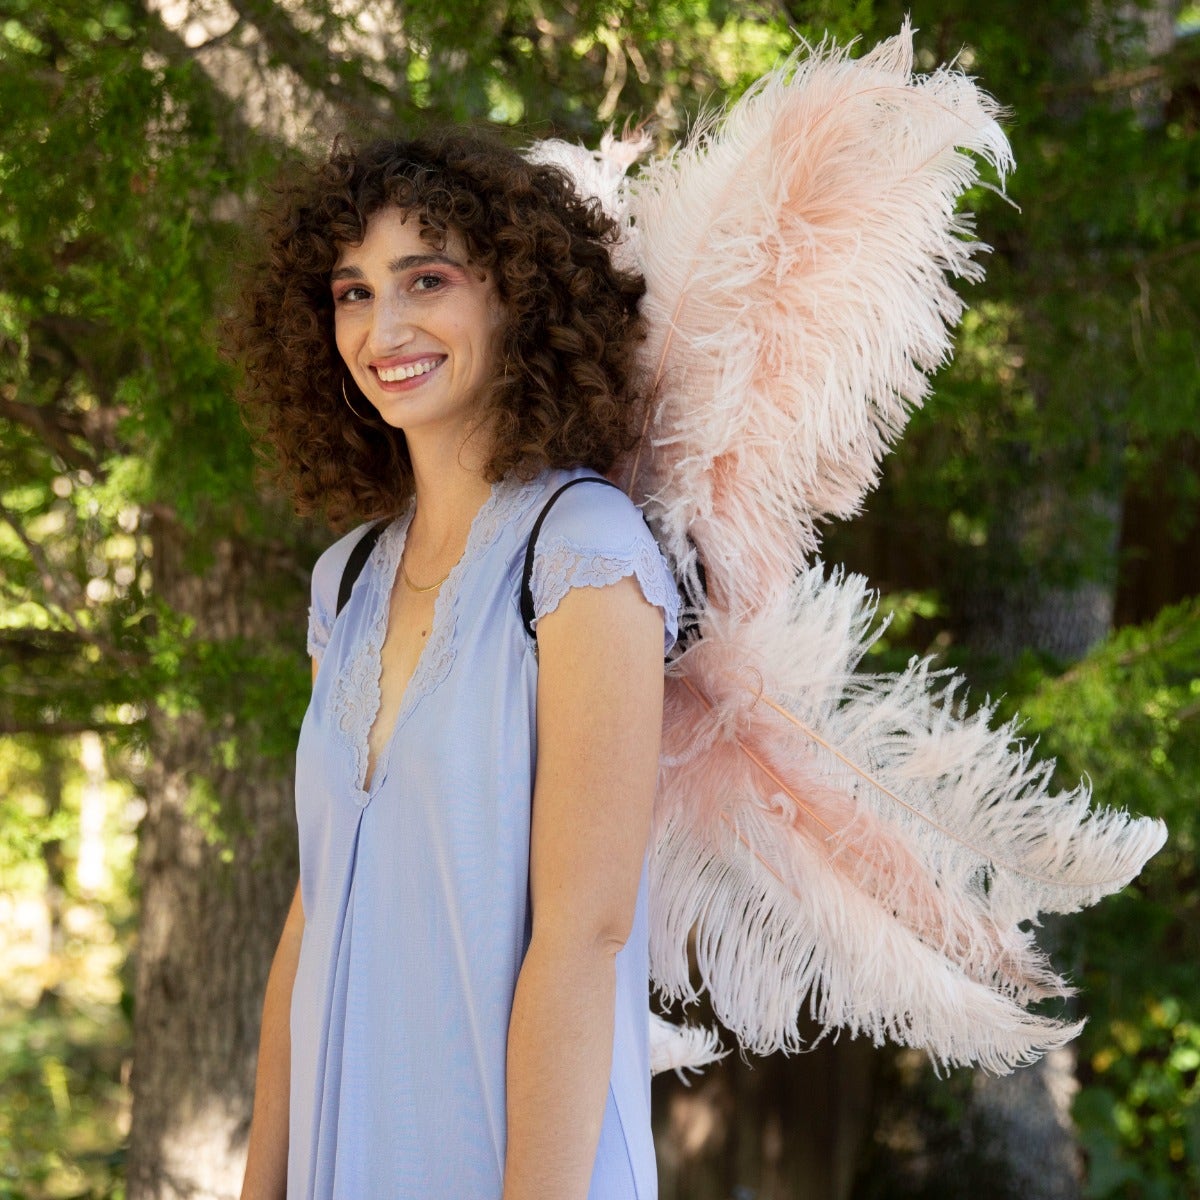 Large Upcycled Ostrich Feather Costume Wings - Flamingo